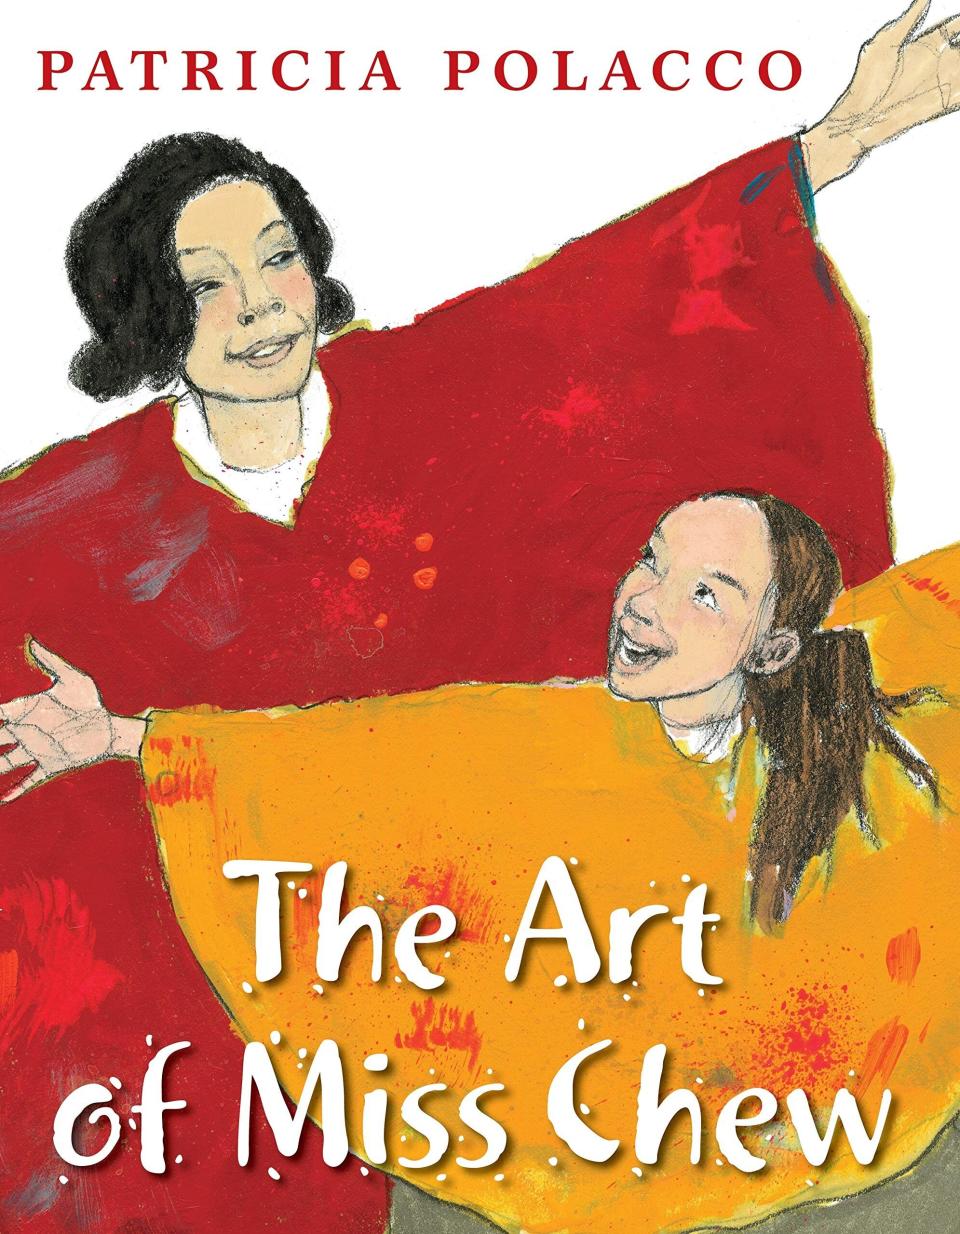 This picture book depicts the special relationship between a creative young girl and her art teacher. <i>(Available <strong><a href="https://amzn.to/3eNagrX" target="_blank" rel="noopener noreferrer">here</a></strong>)</i>